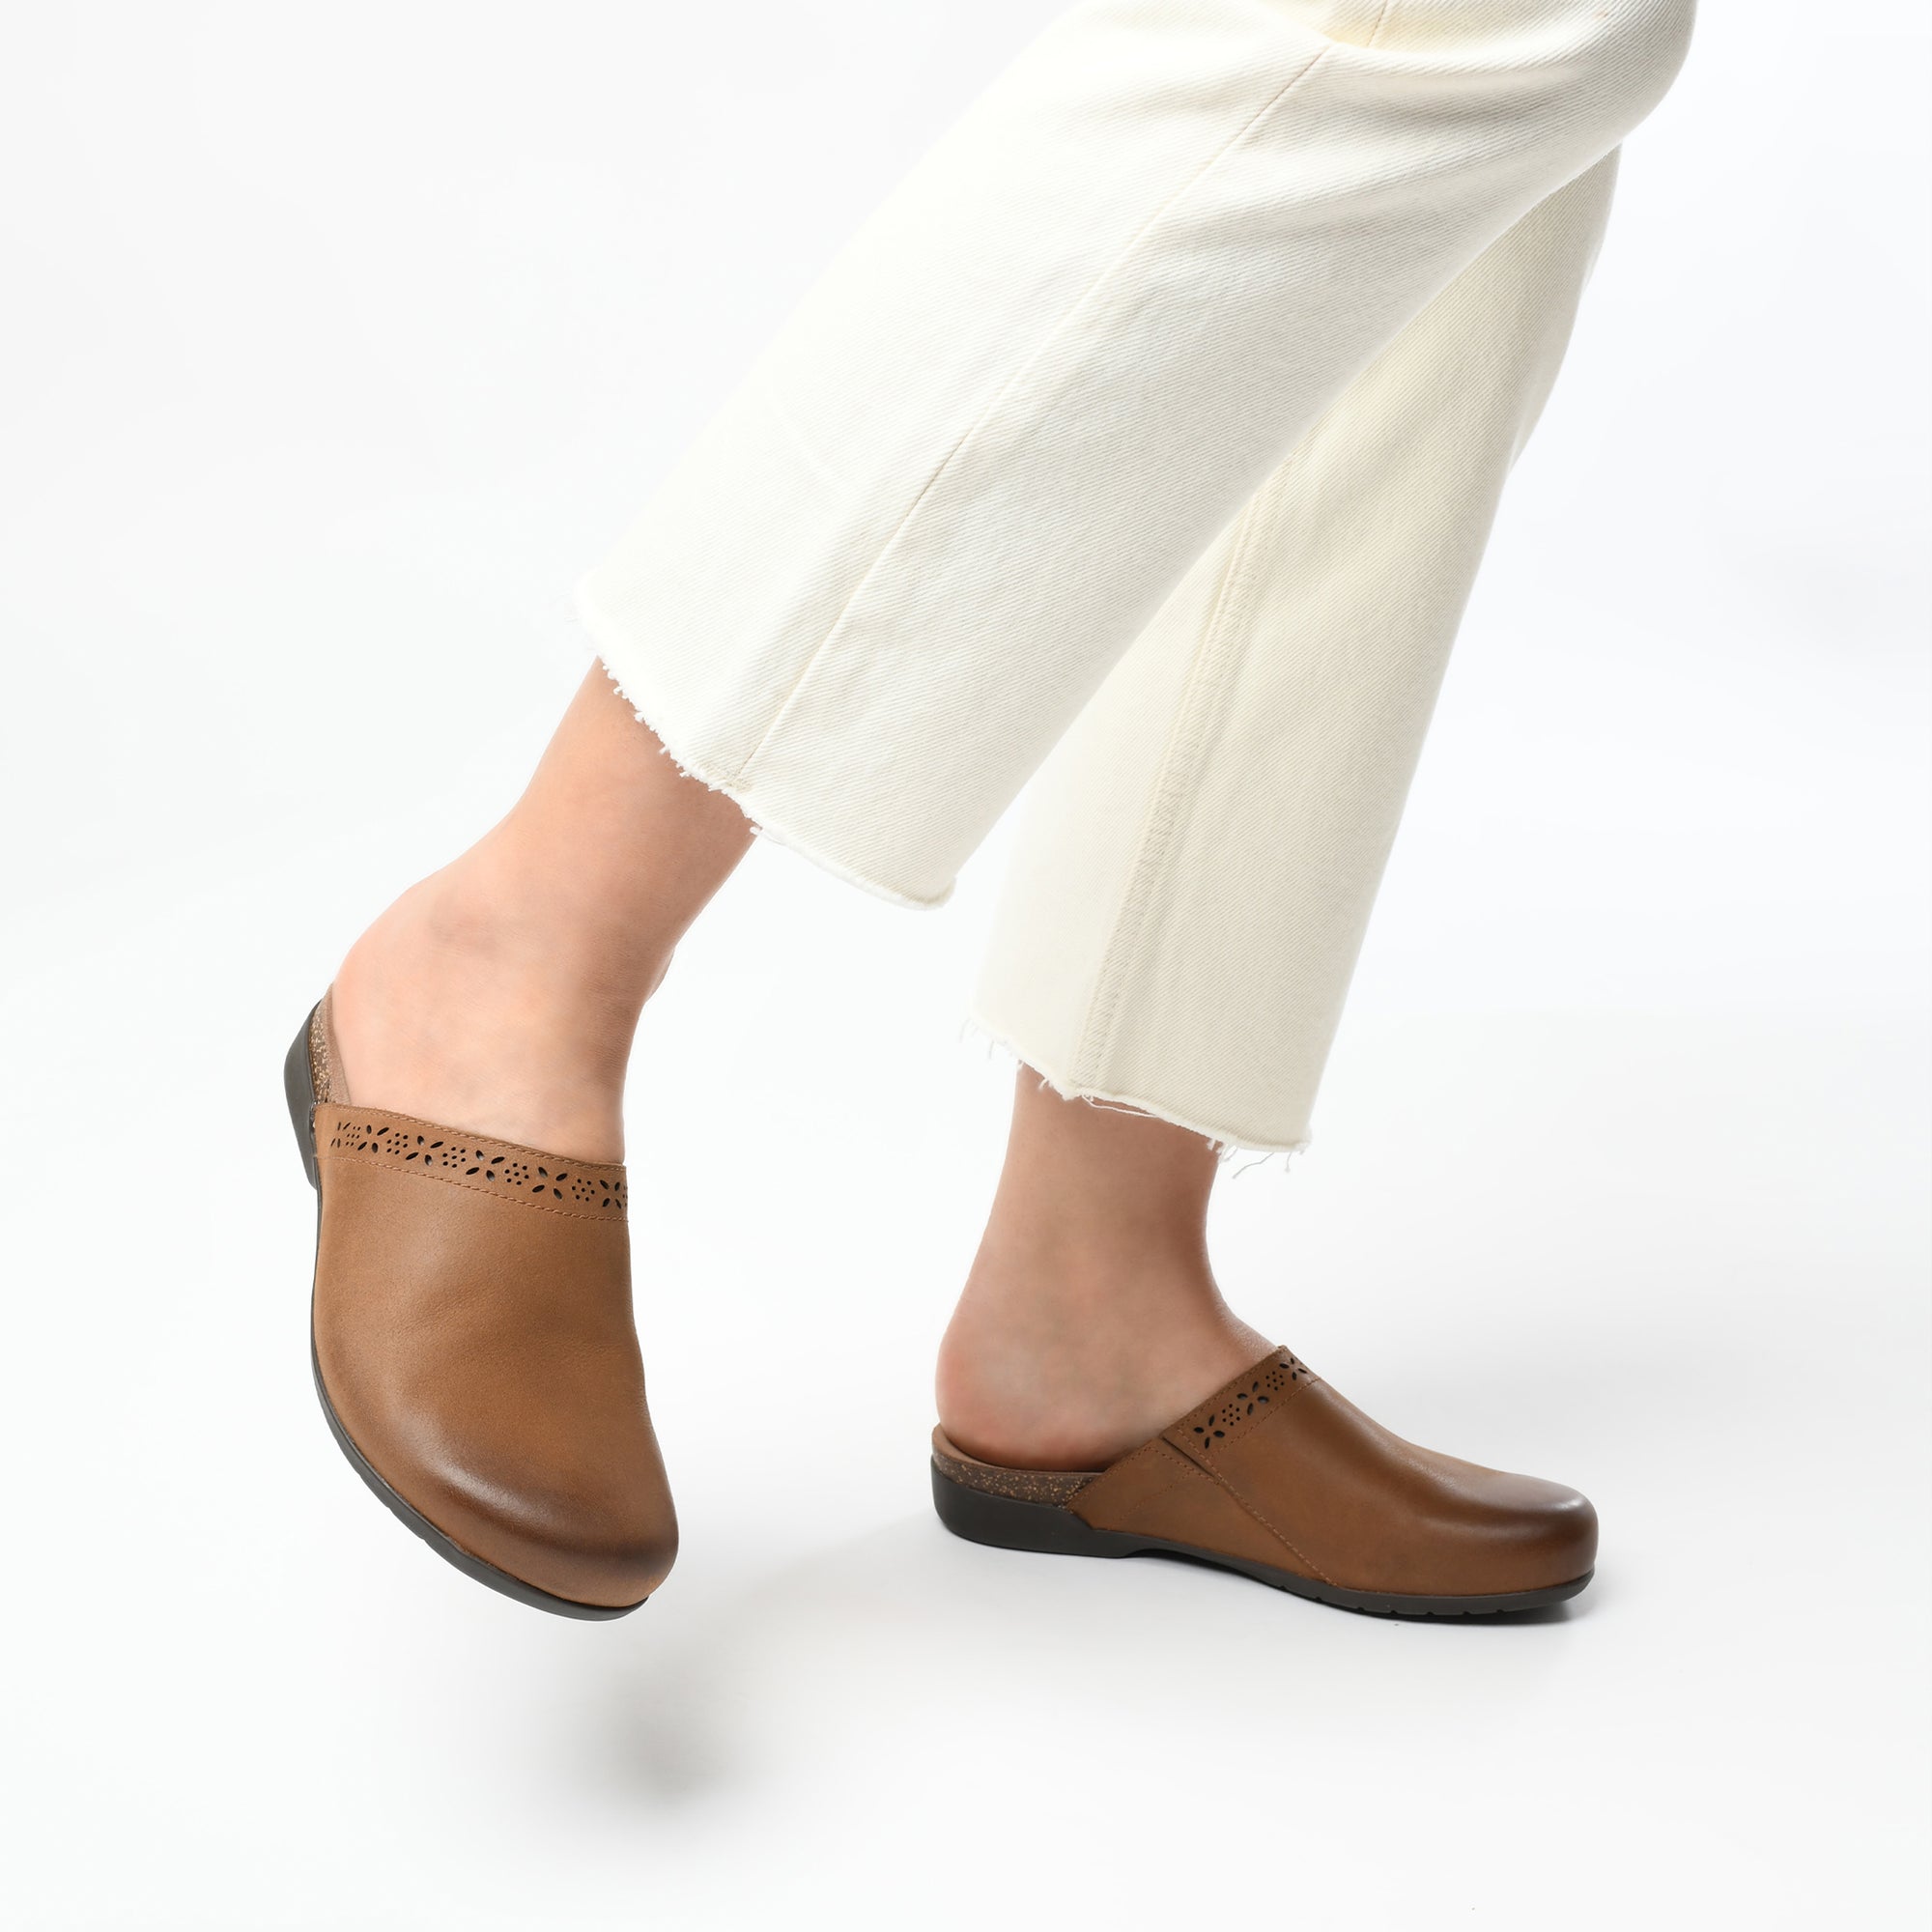 Brown mules with cutout design shown on foot.